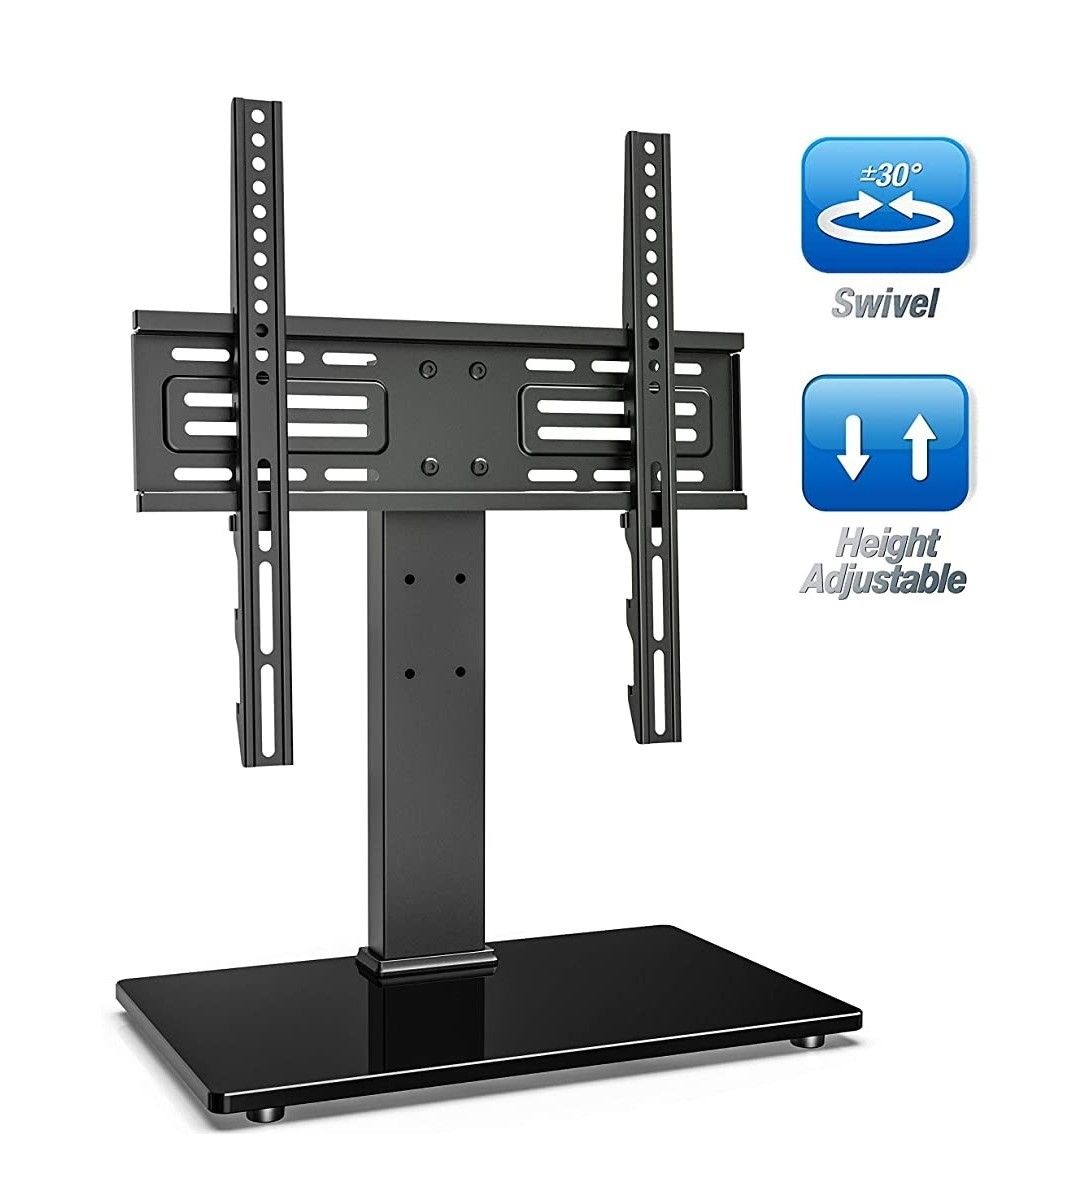 Universal Swivel TV Stand for 27-55 inch TVs Height Adjustable